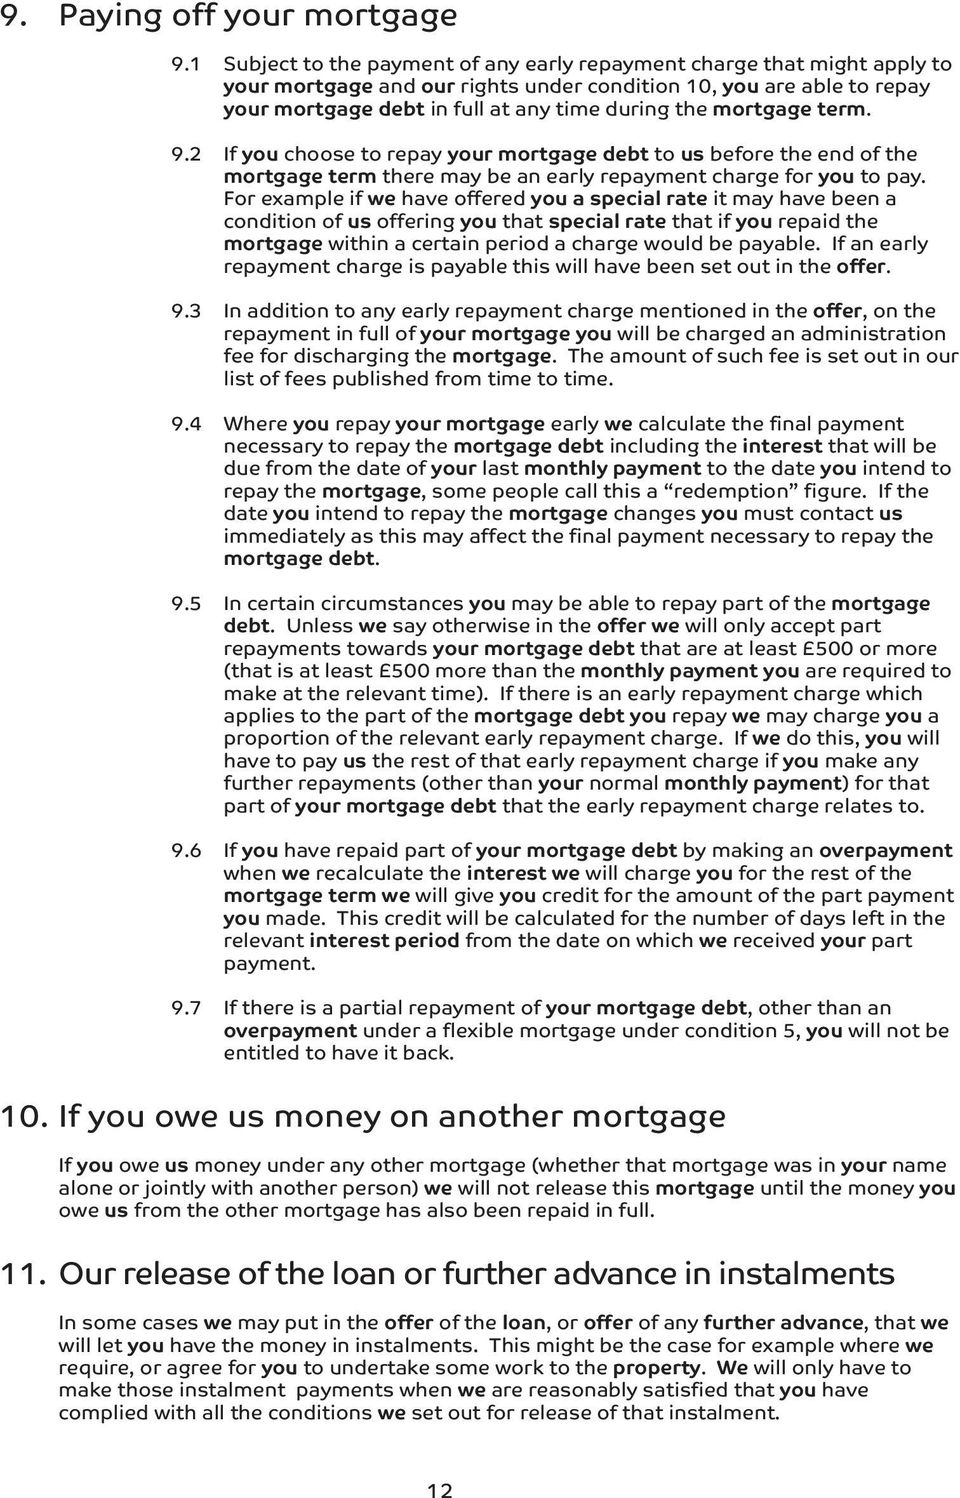 mortgage term. 9.2 If you choose to repay your mortgage debt to us before the end of the mortgage term there may be an early repayment charge for you to pay.